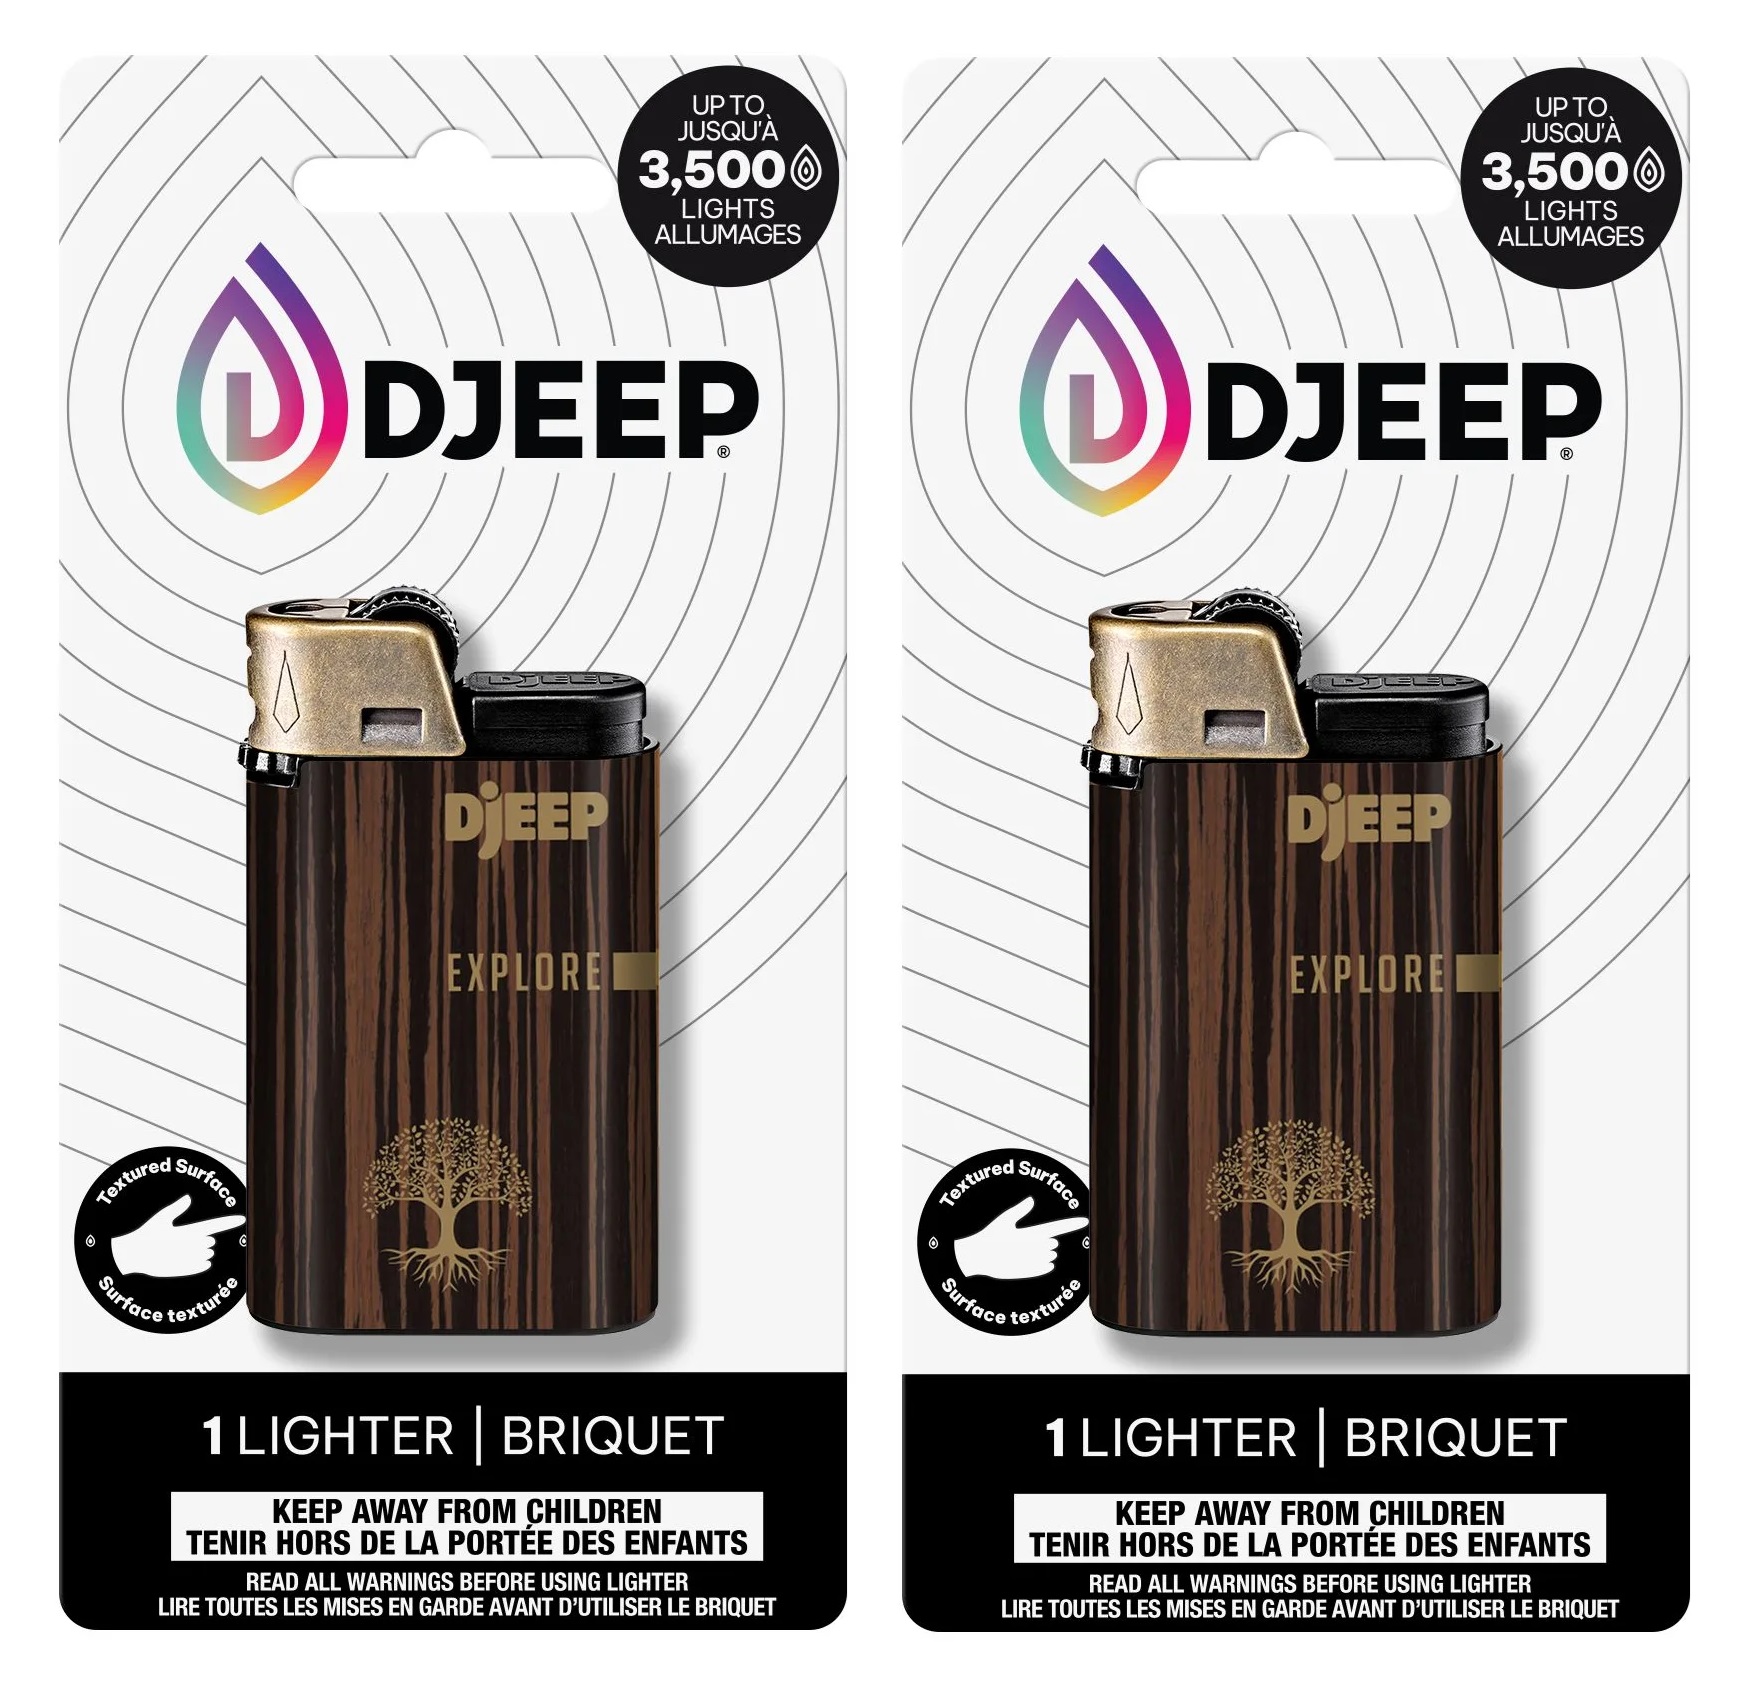 2-Pack BIC DJeep Pocket Lighter Bold Collection (Colors May Vary) + $3.43 Walmart Cash $6.85 + Free Store Pickup at Walmart, FS w/ Walmart+ or FS on $35+